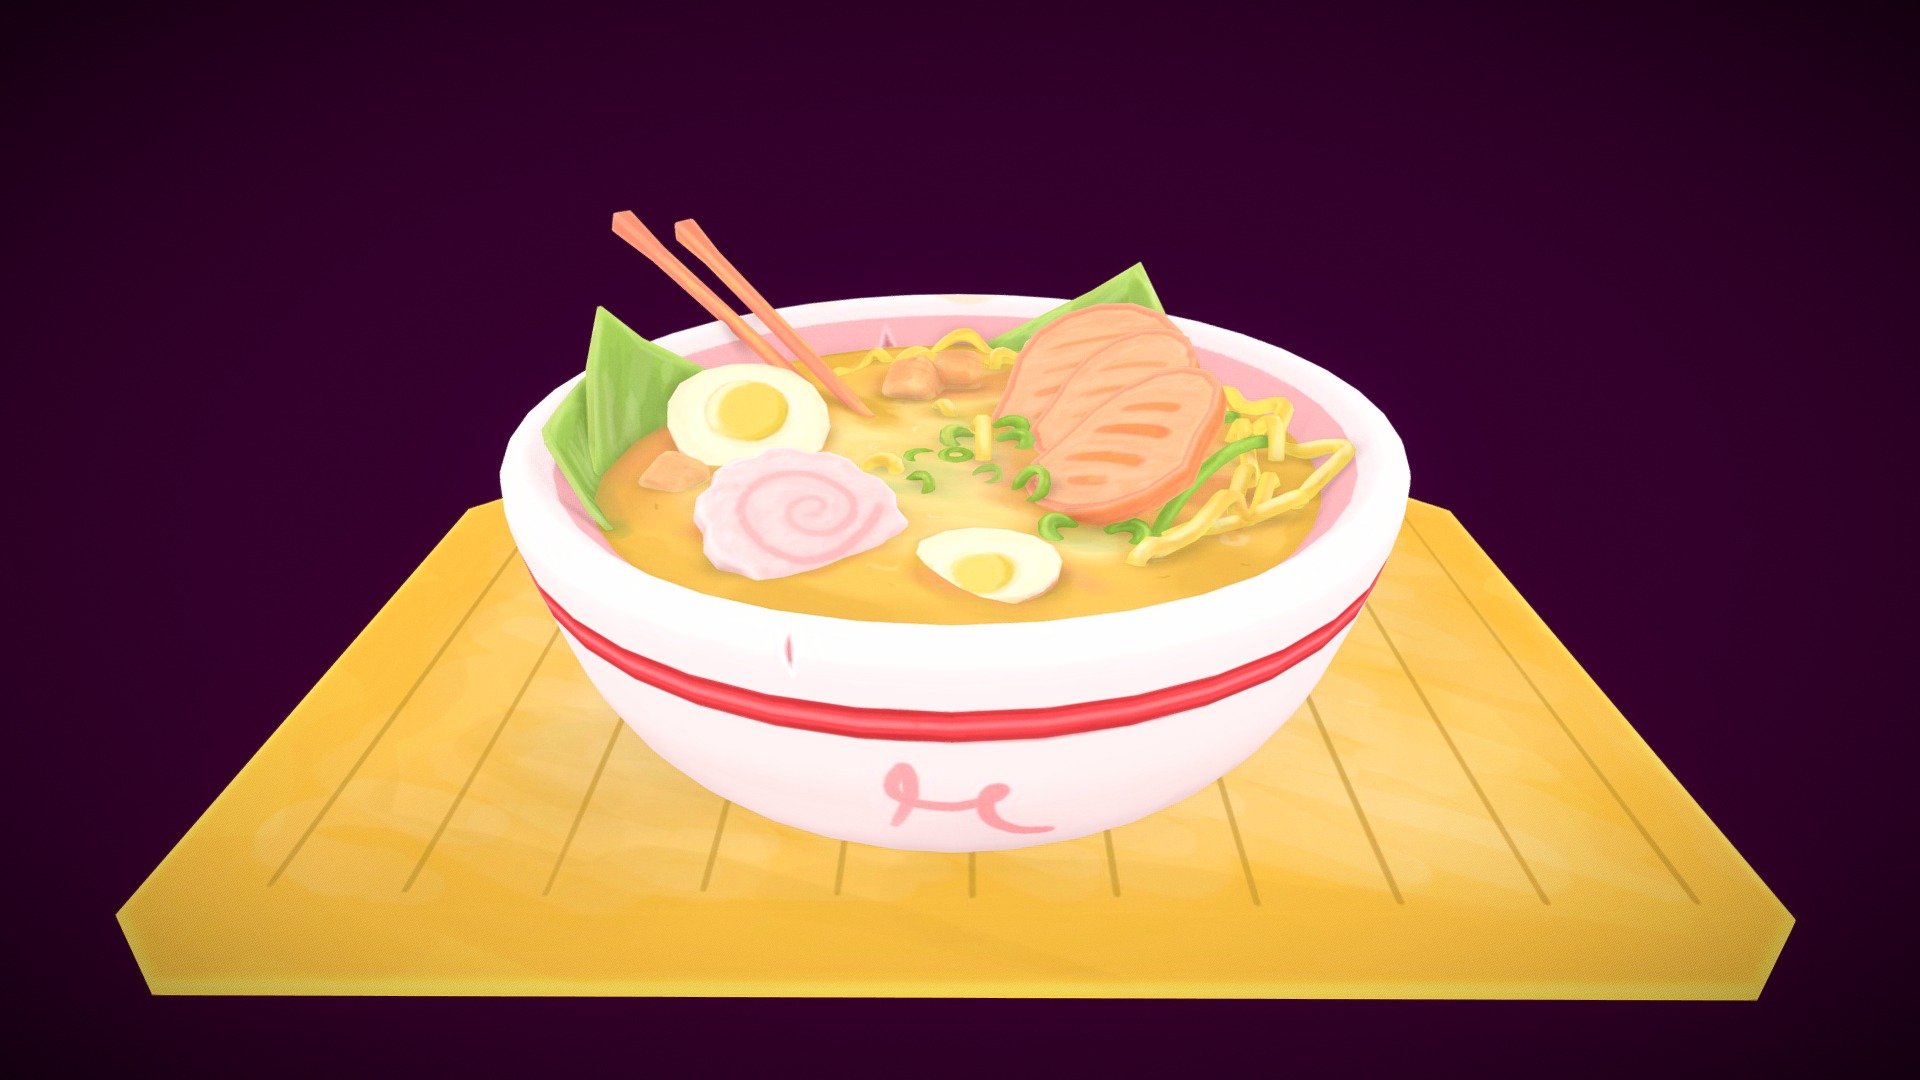 Made just for fun and love for ramen :)
The textures were made in 3D-coat and the mesh was made in Maya 3d model